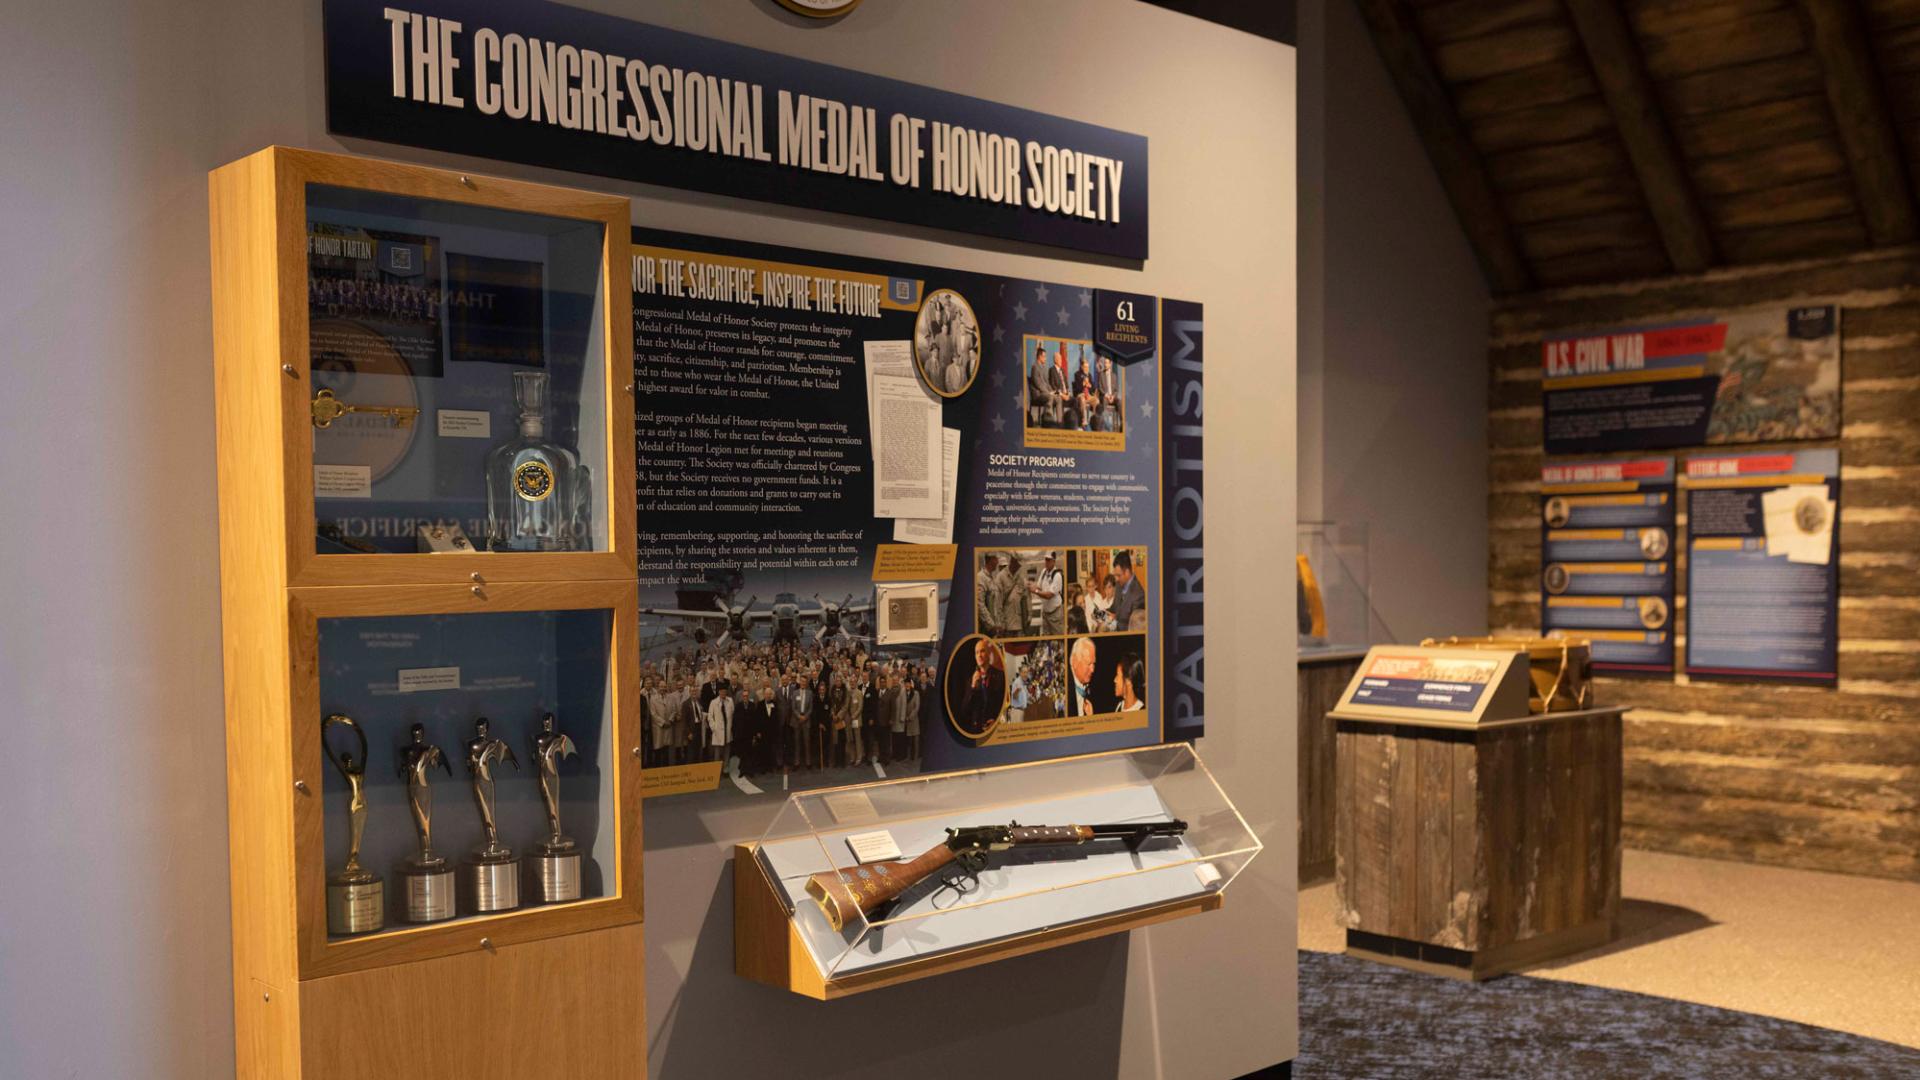 image of a exhibition in the Congression Medal of Honor Museum